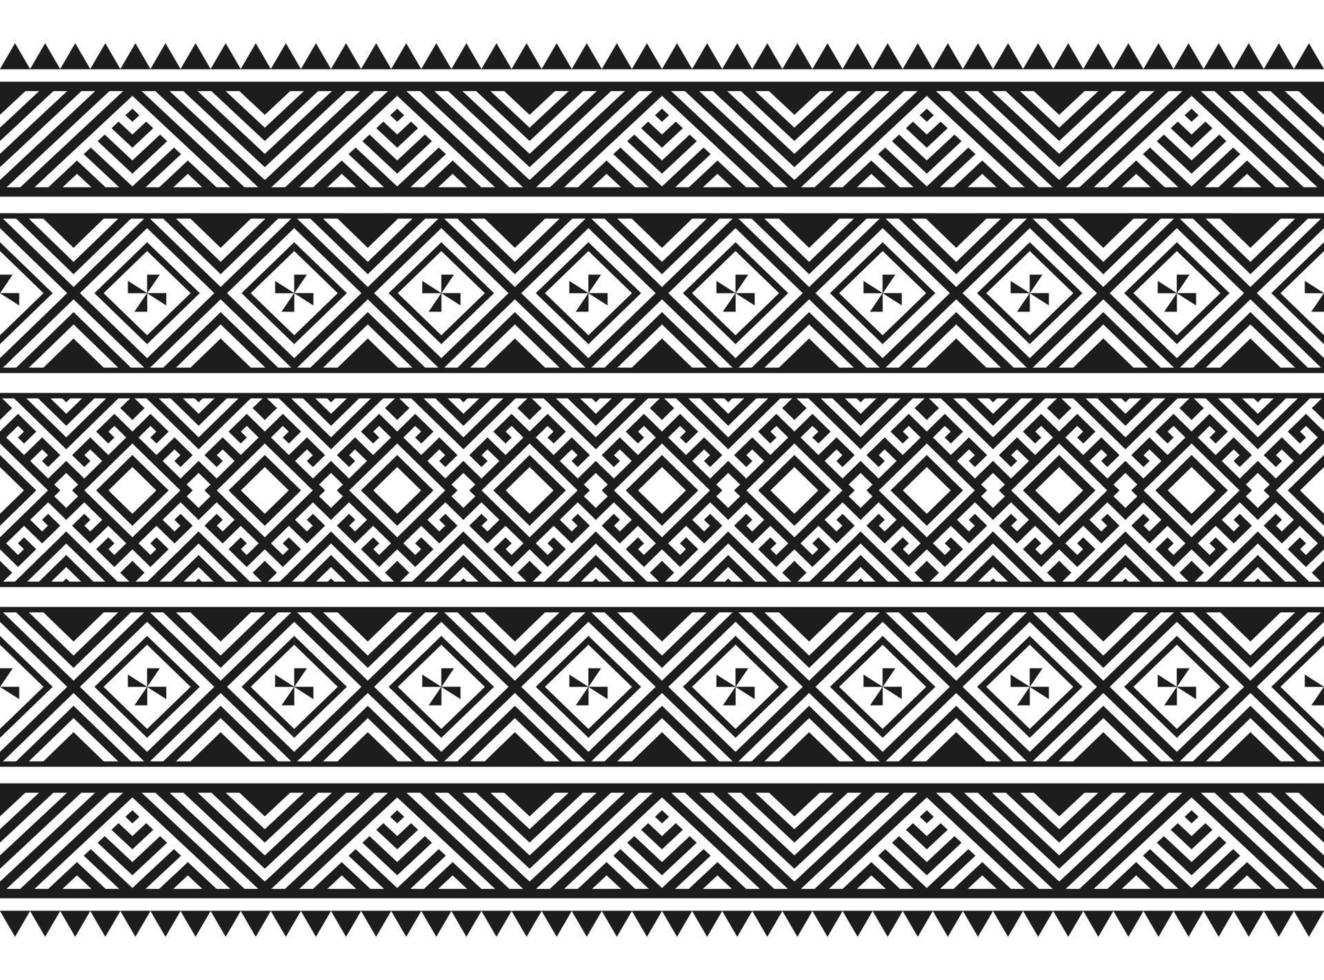 African pattern ethnic tribal art for textile, prints, greeting card, decoration or Background, tribal doodle vector